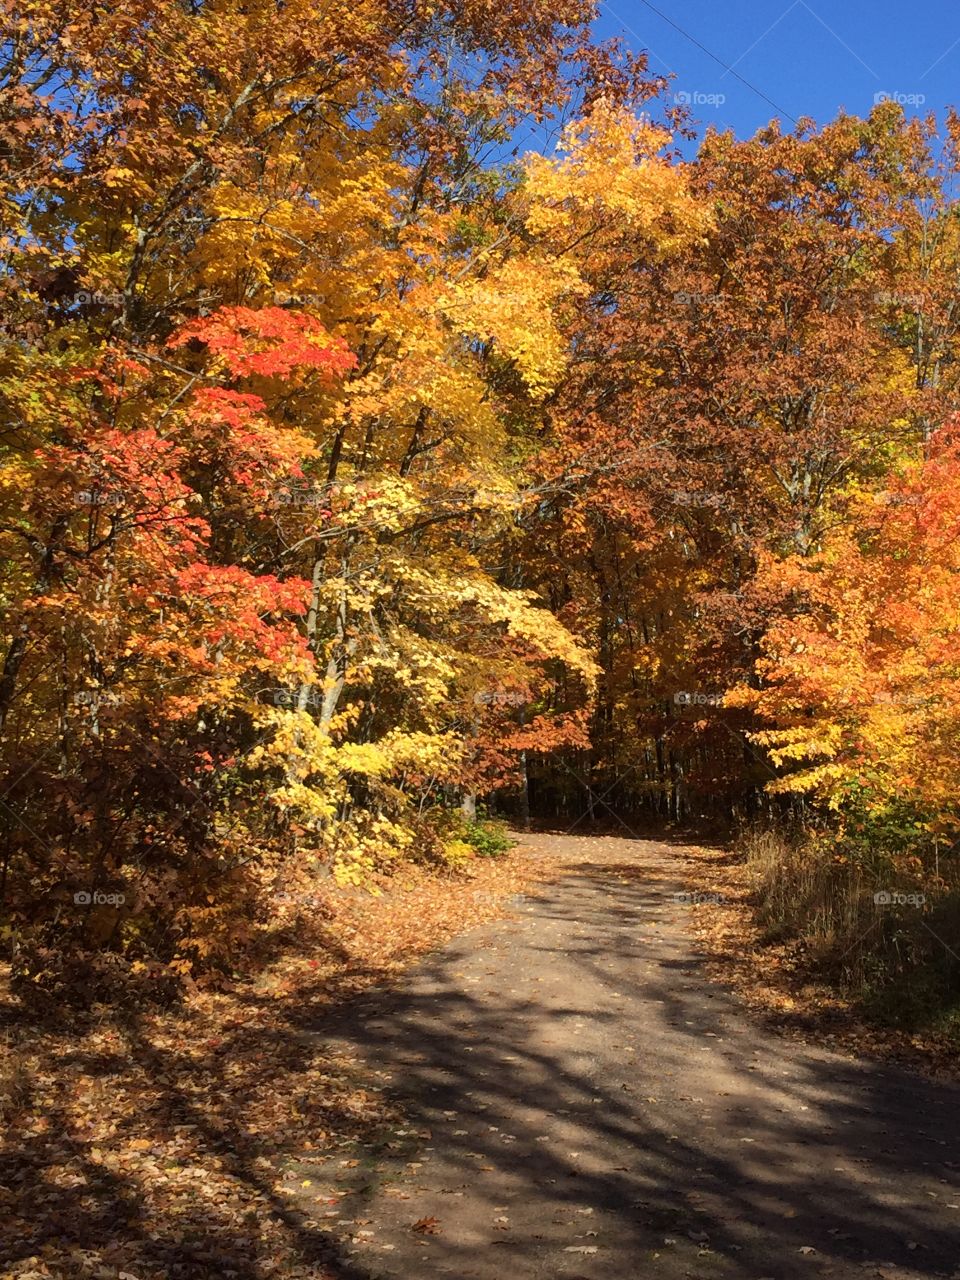 A road less traveled in the fall